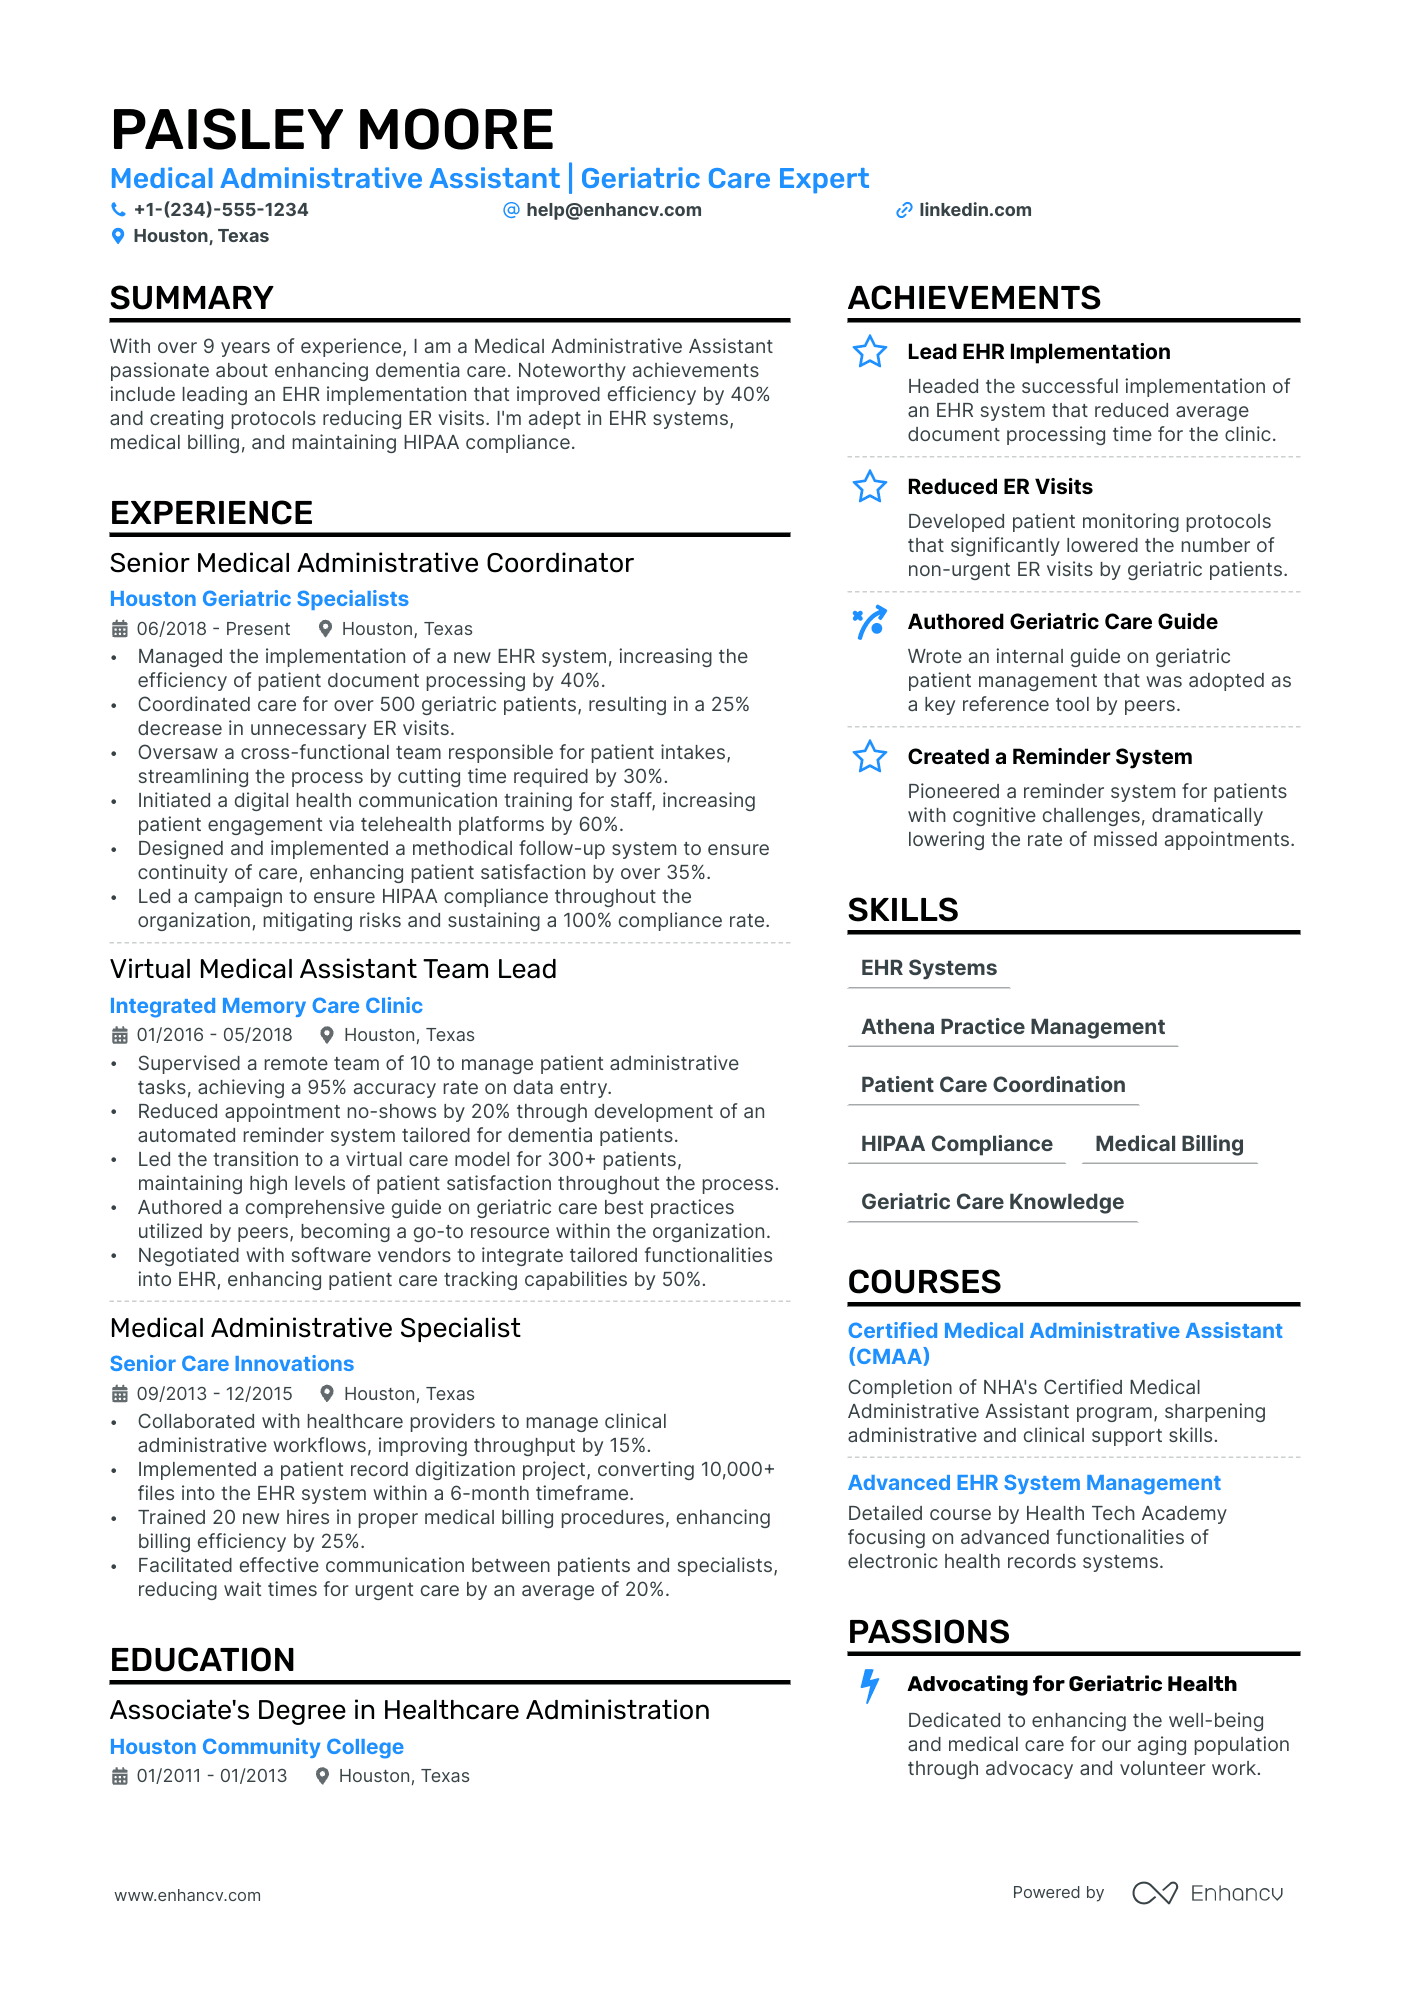 profile for resume for entry level administrative assistant